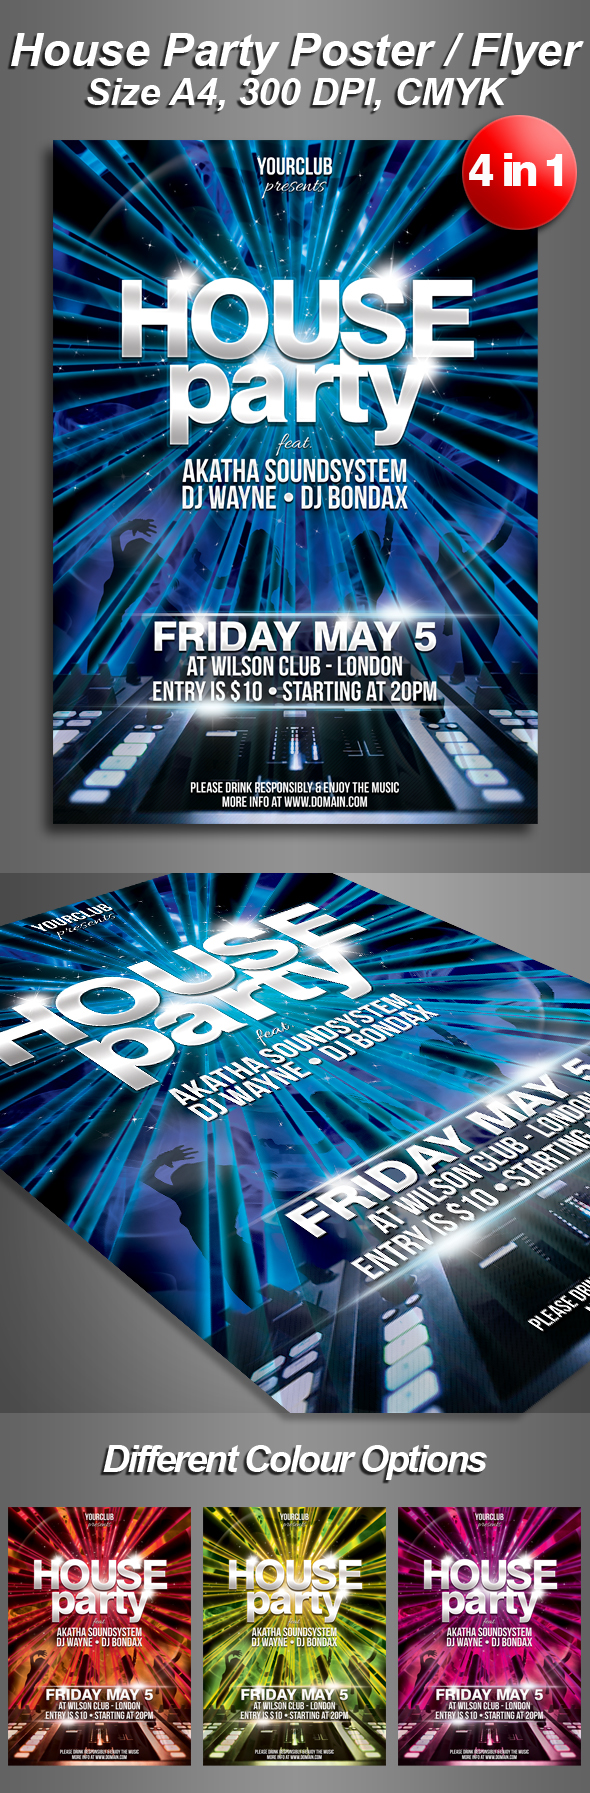 beam a4 club disco house flyer template nightclub party poster print presentation Promotion laser glow